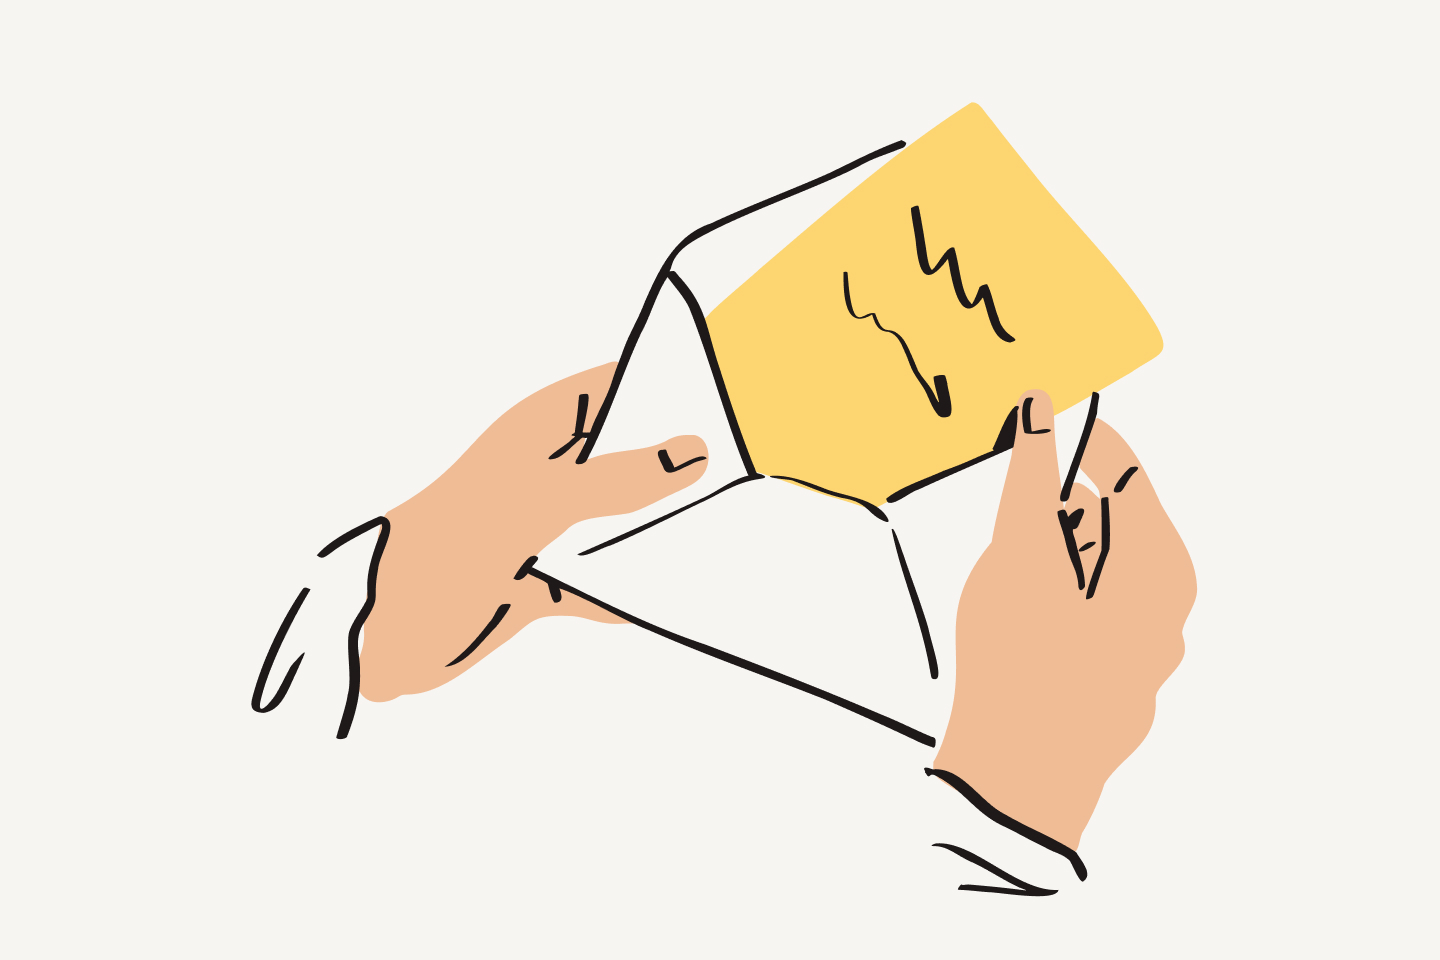 A person takes a piece of yellow paper with writing on it out of an envelope.